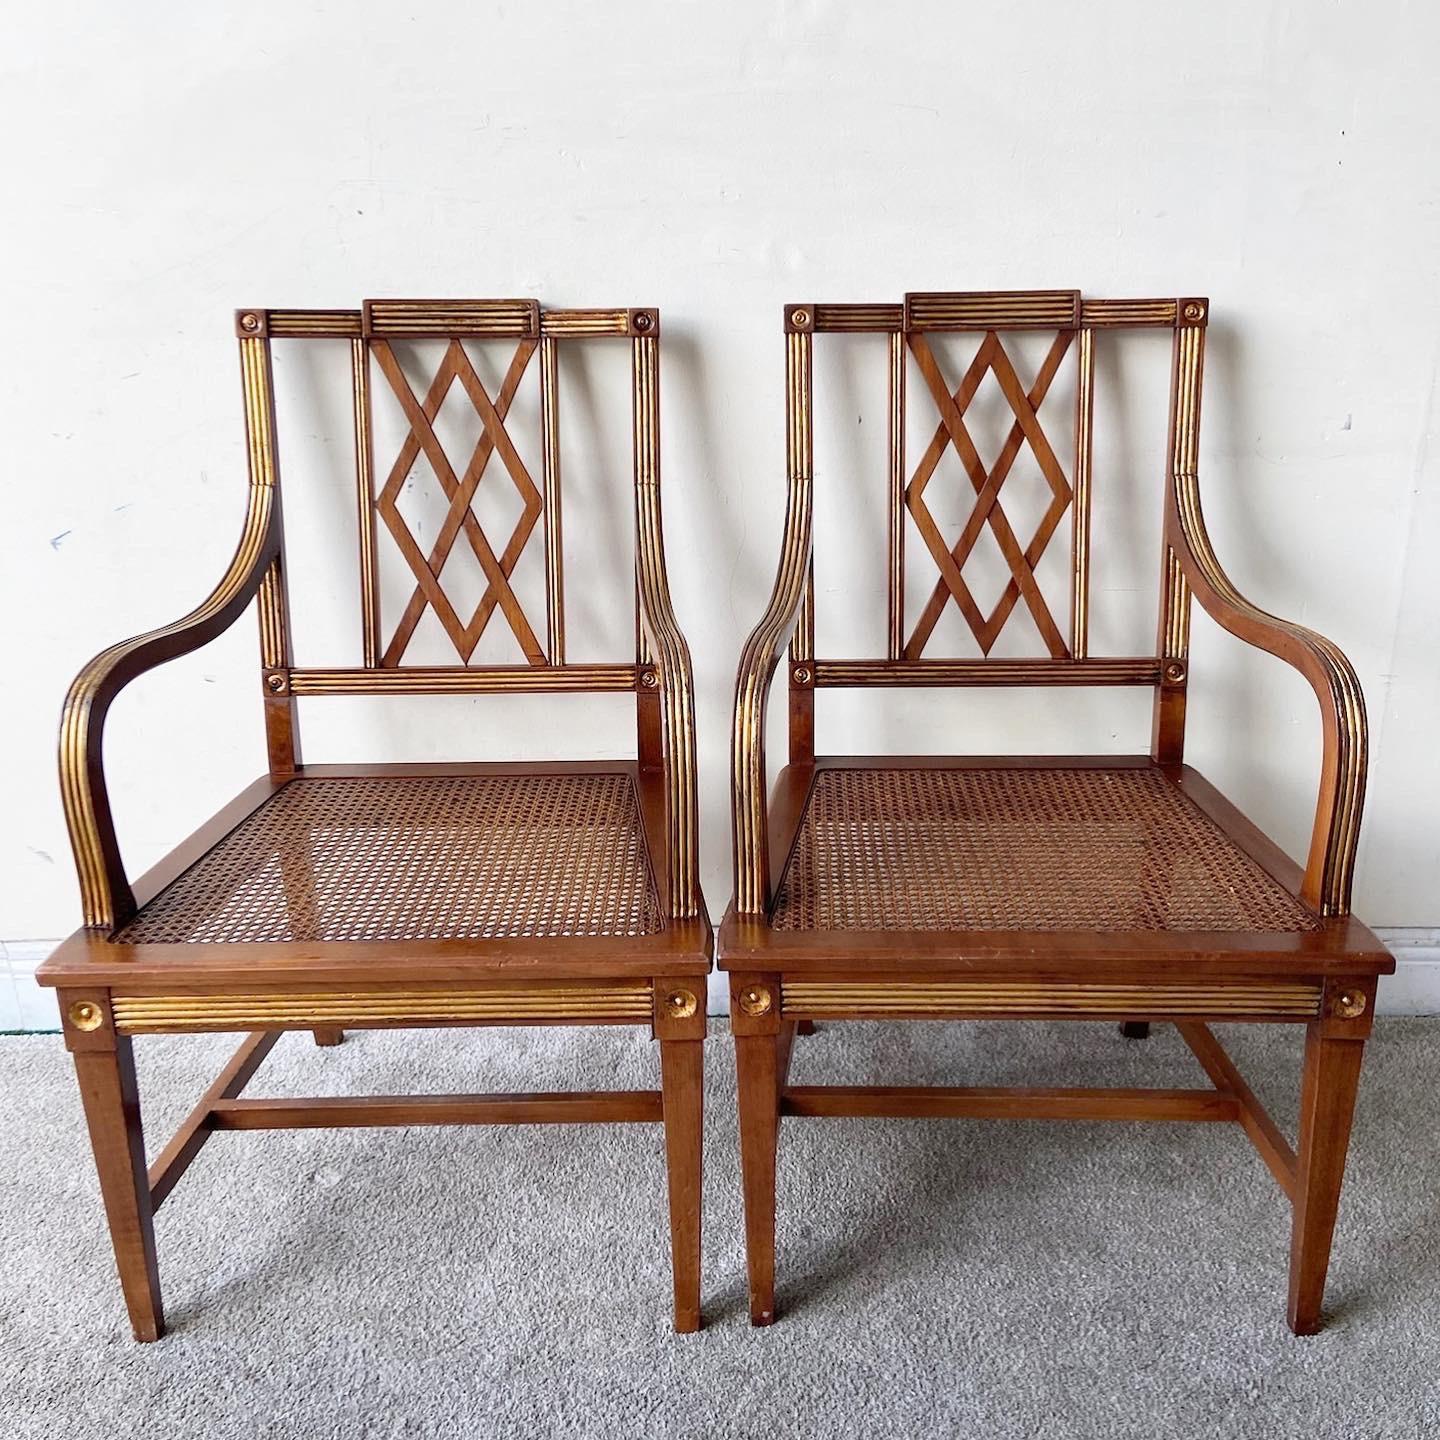 Late 20th Century Vintage Cane and Wood Dining Chairs for Bloomingdale’s, 8 Chairs